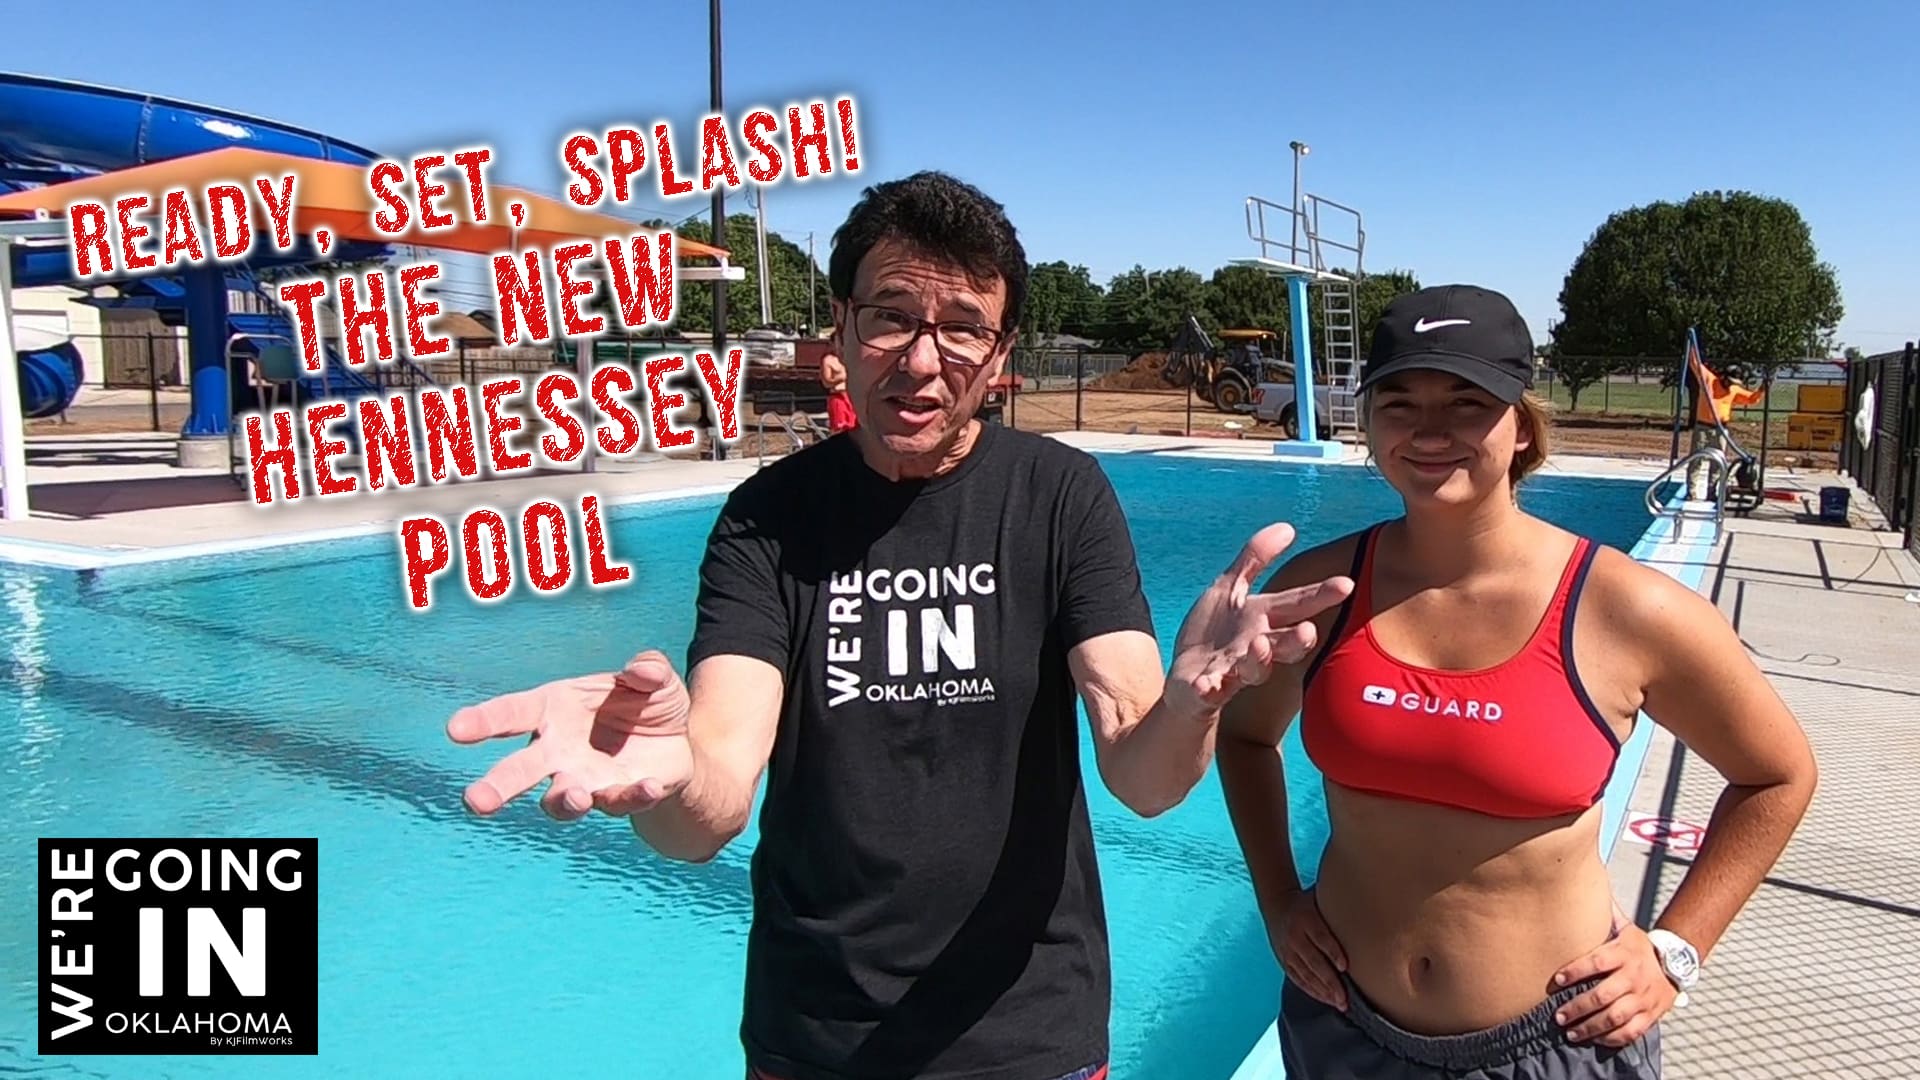 WE’RE GOING IN – THE NEW HENNESSEY POOL!